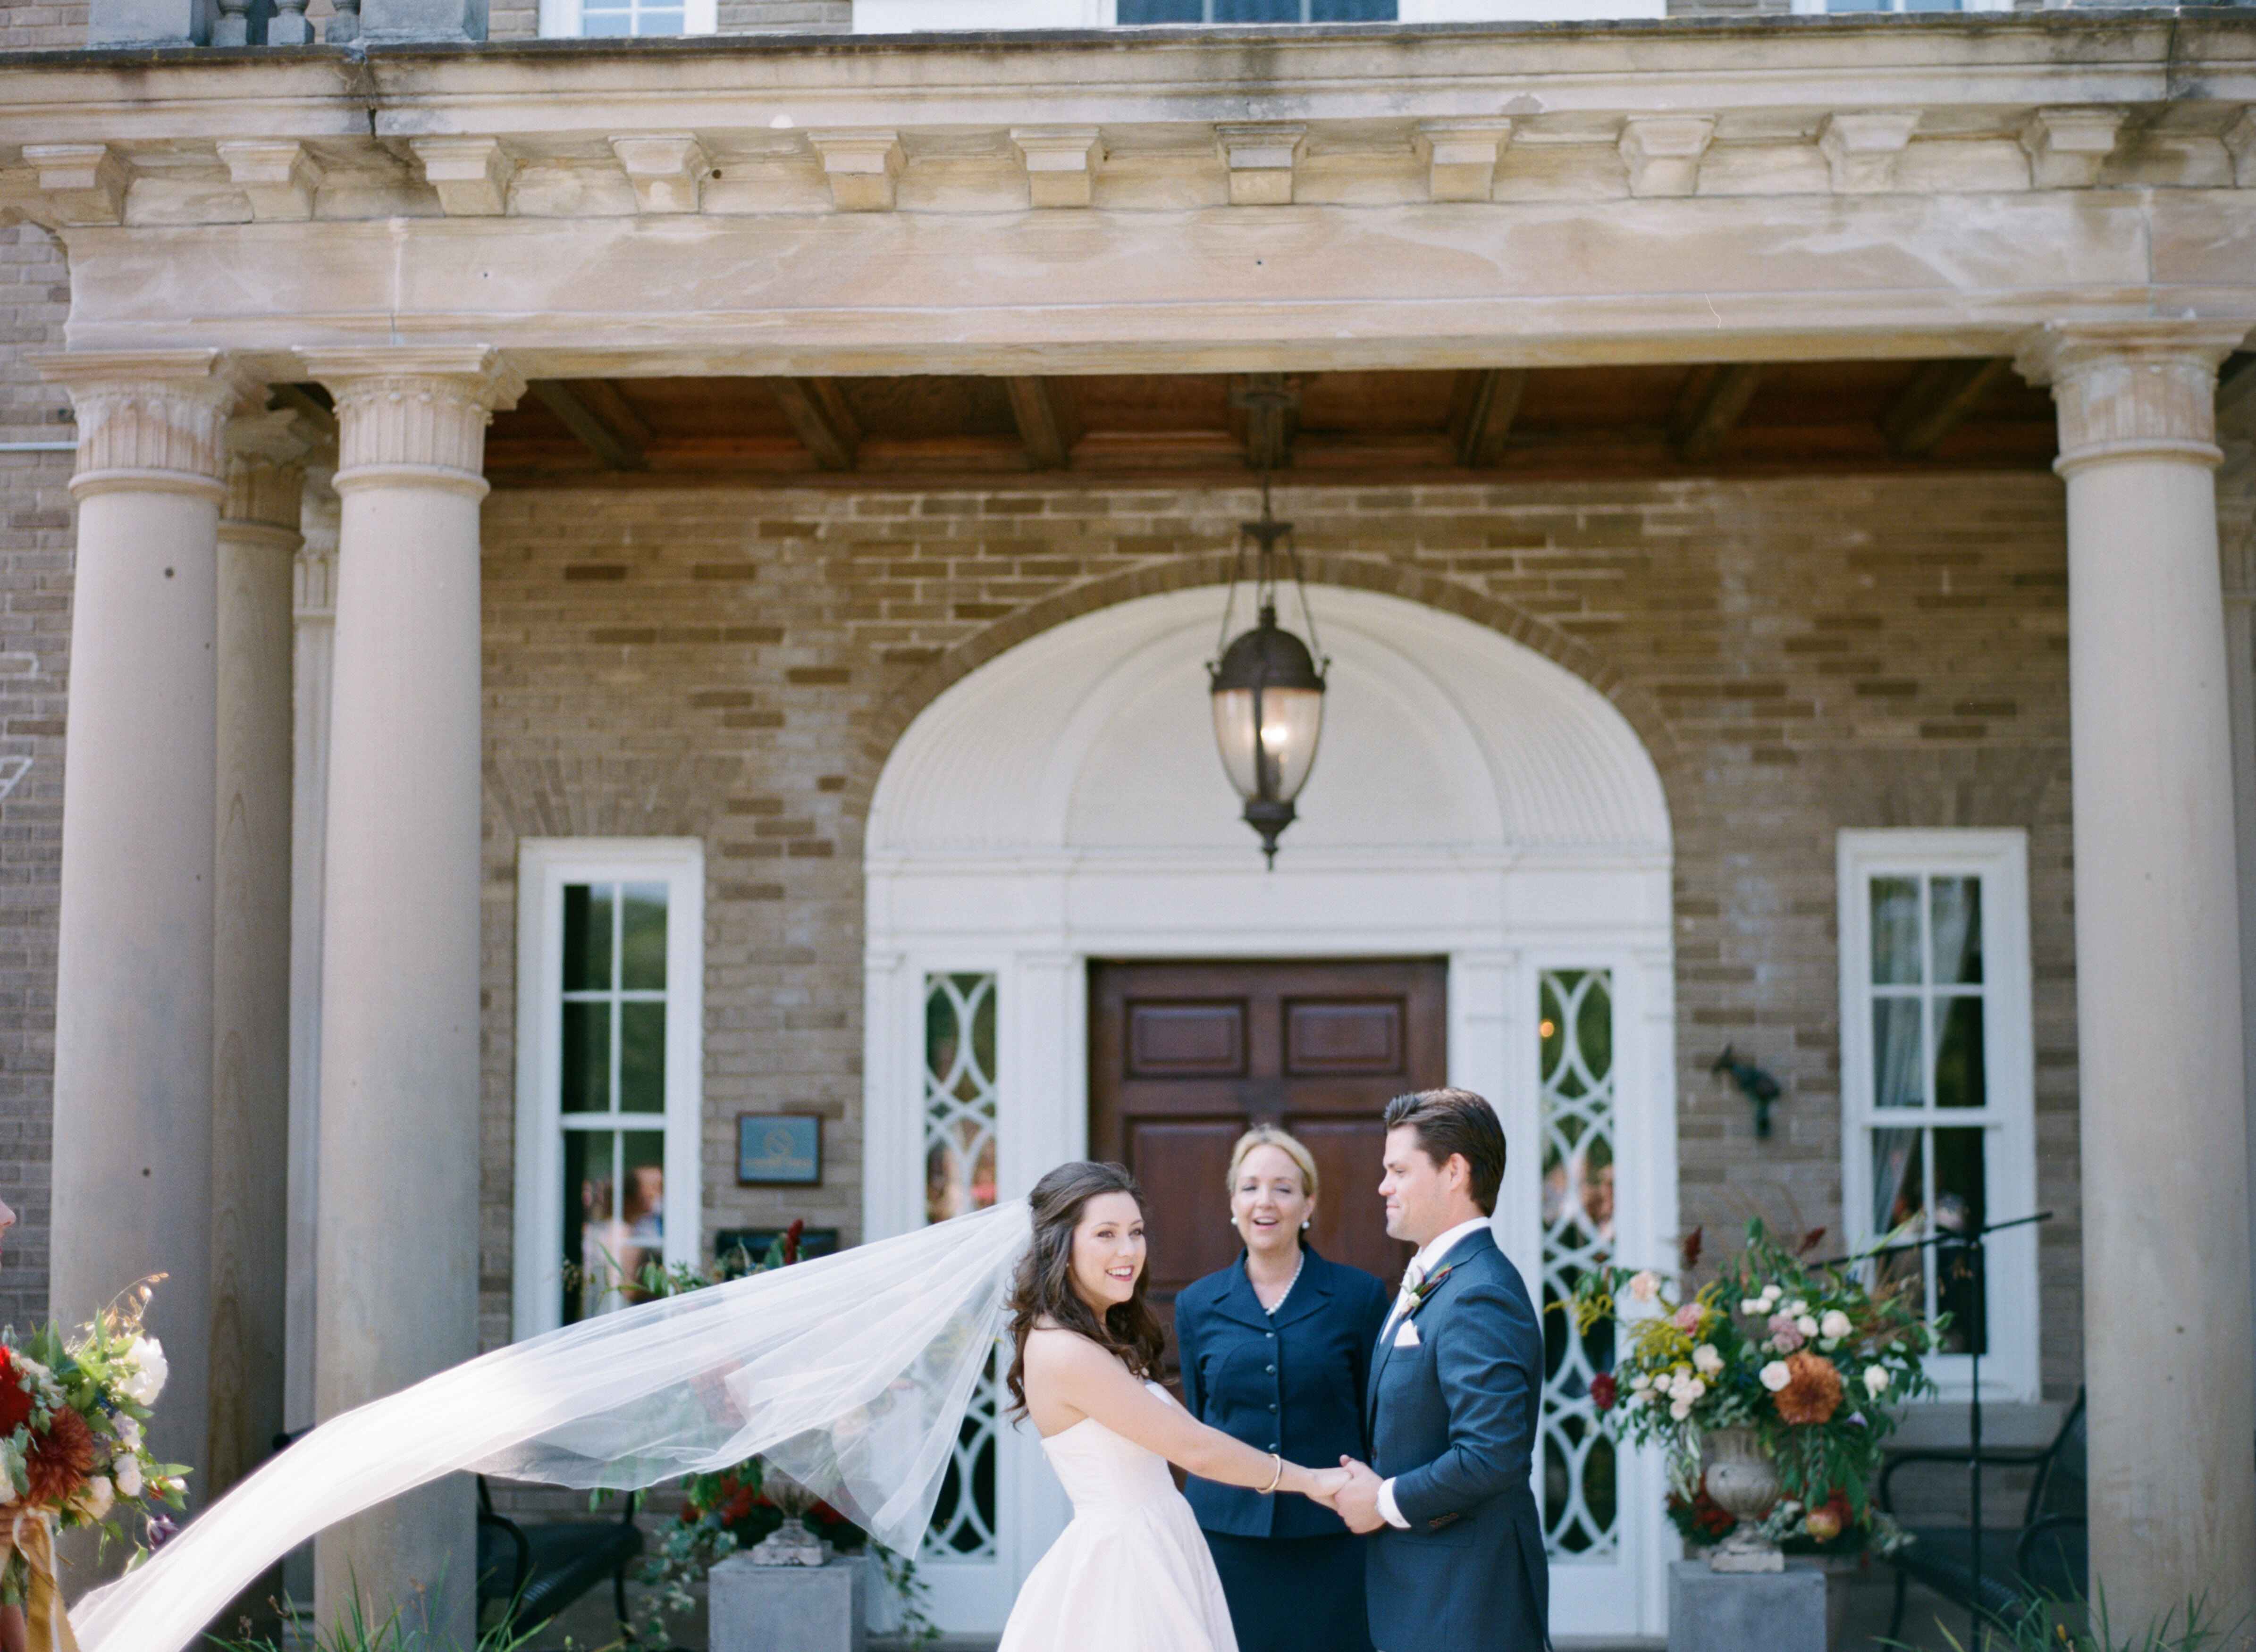 The Felt Mansion Wedding | The Day's Design | Cory Weber Photography